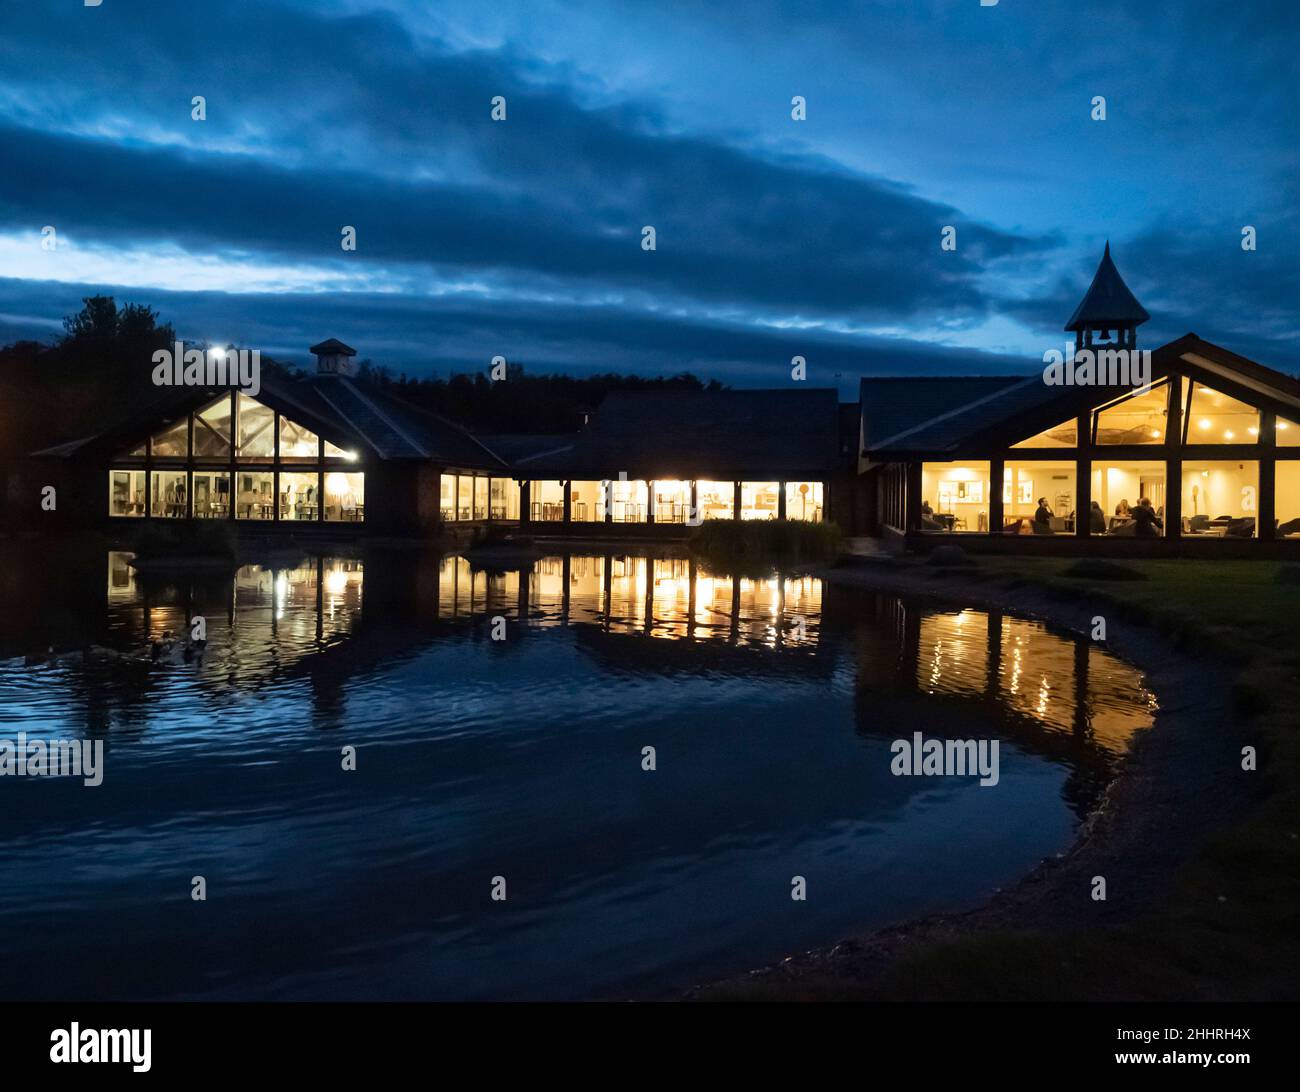 Tebay M6 northbound services near Kendal in Cumbria, at dusk with the restaurant lights and the pond. Stock Photo